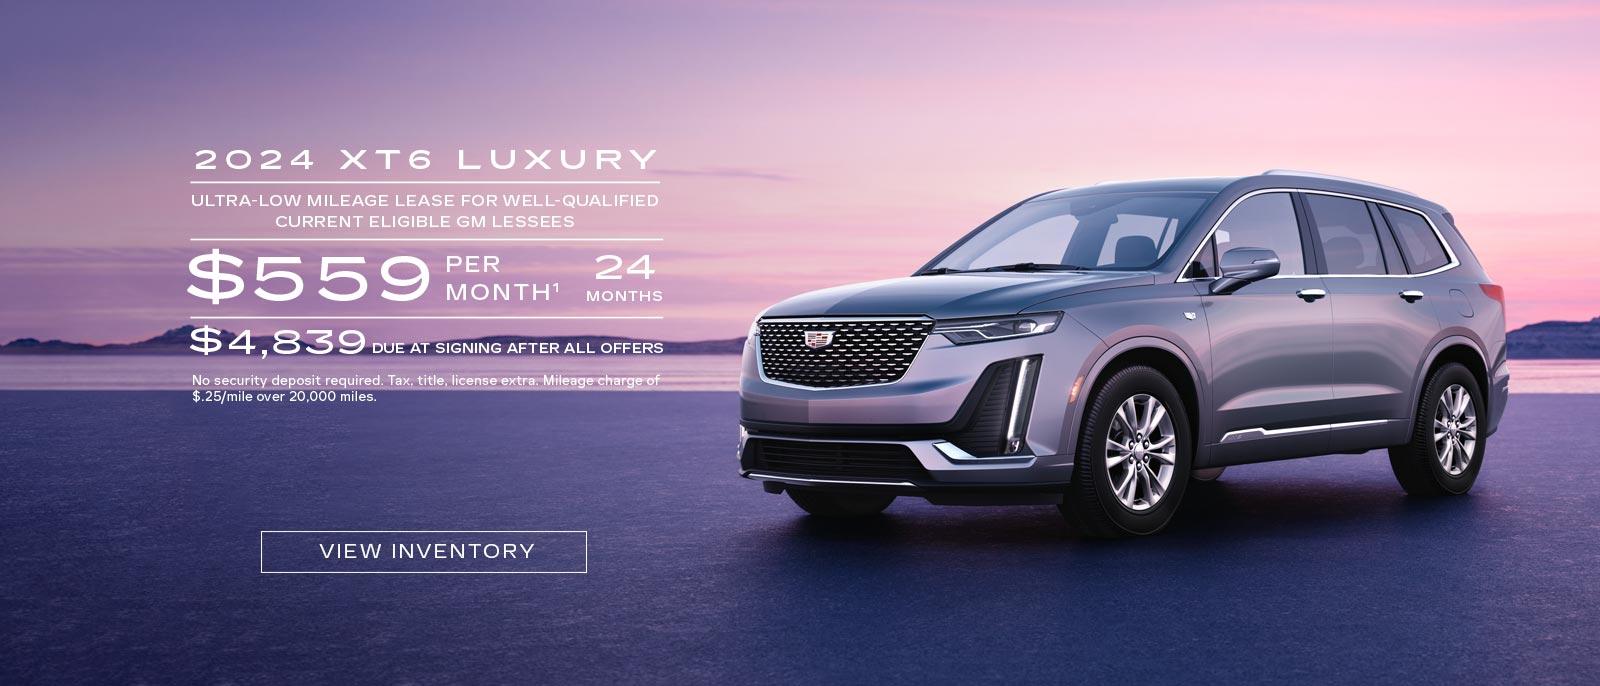 2024 XT6 Luxury Ultra-low mileage lease for well-qualified current eligible GM lessees. $559 per month. 24 months. $4,839 Due at signing after all offers.